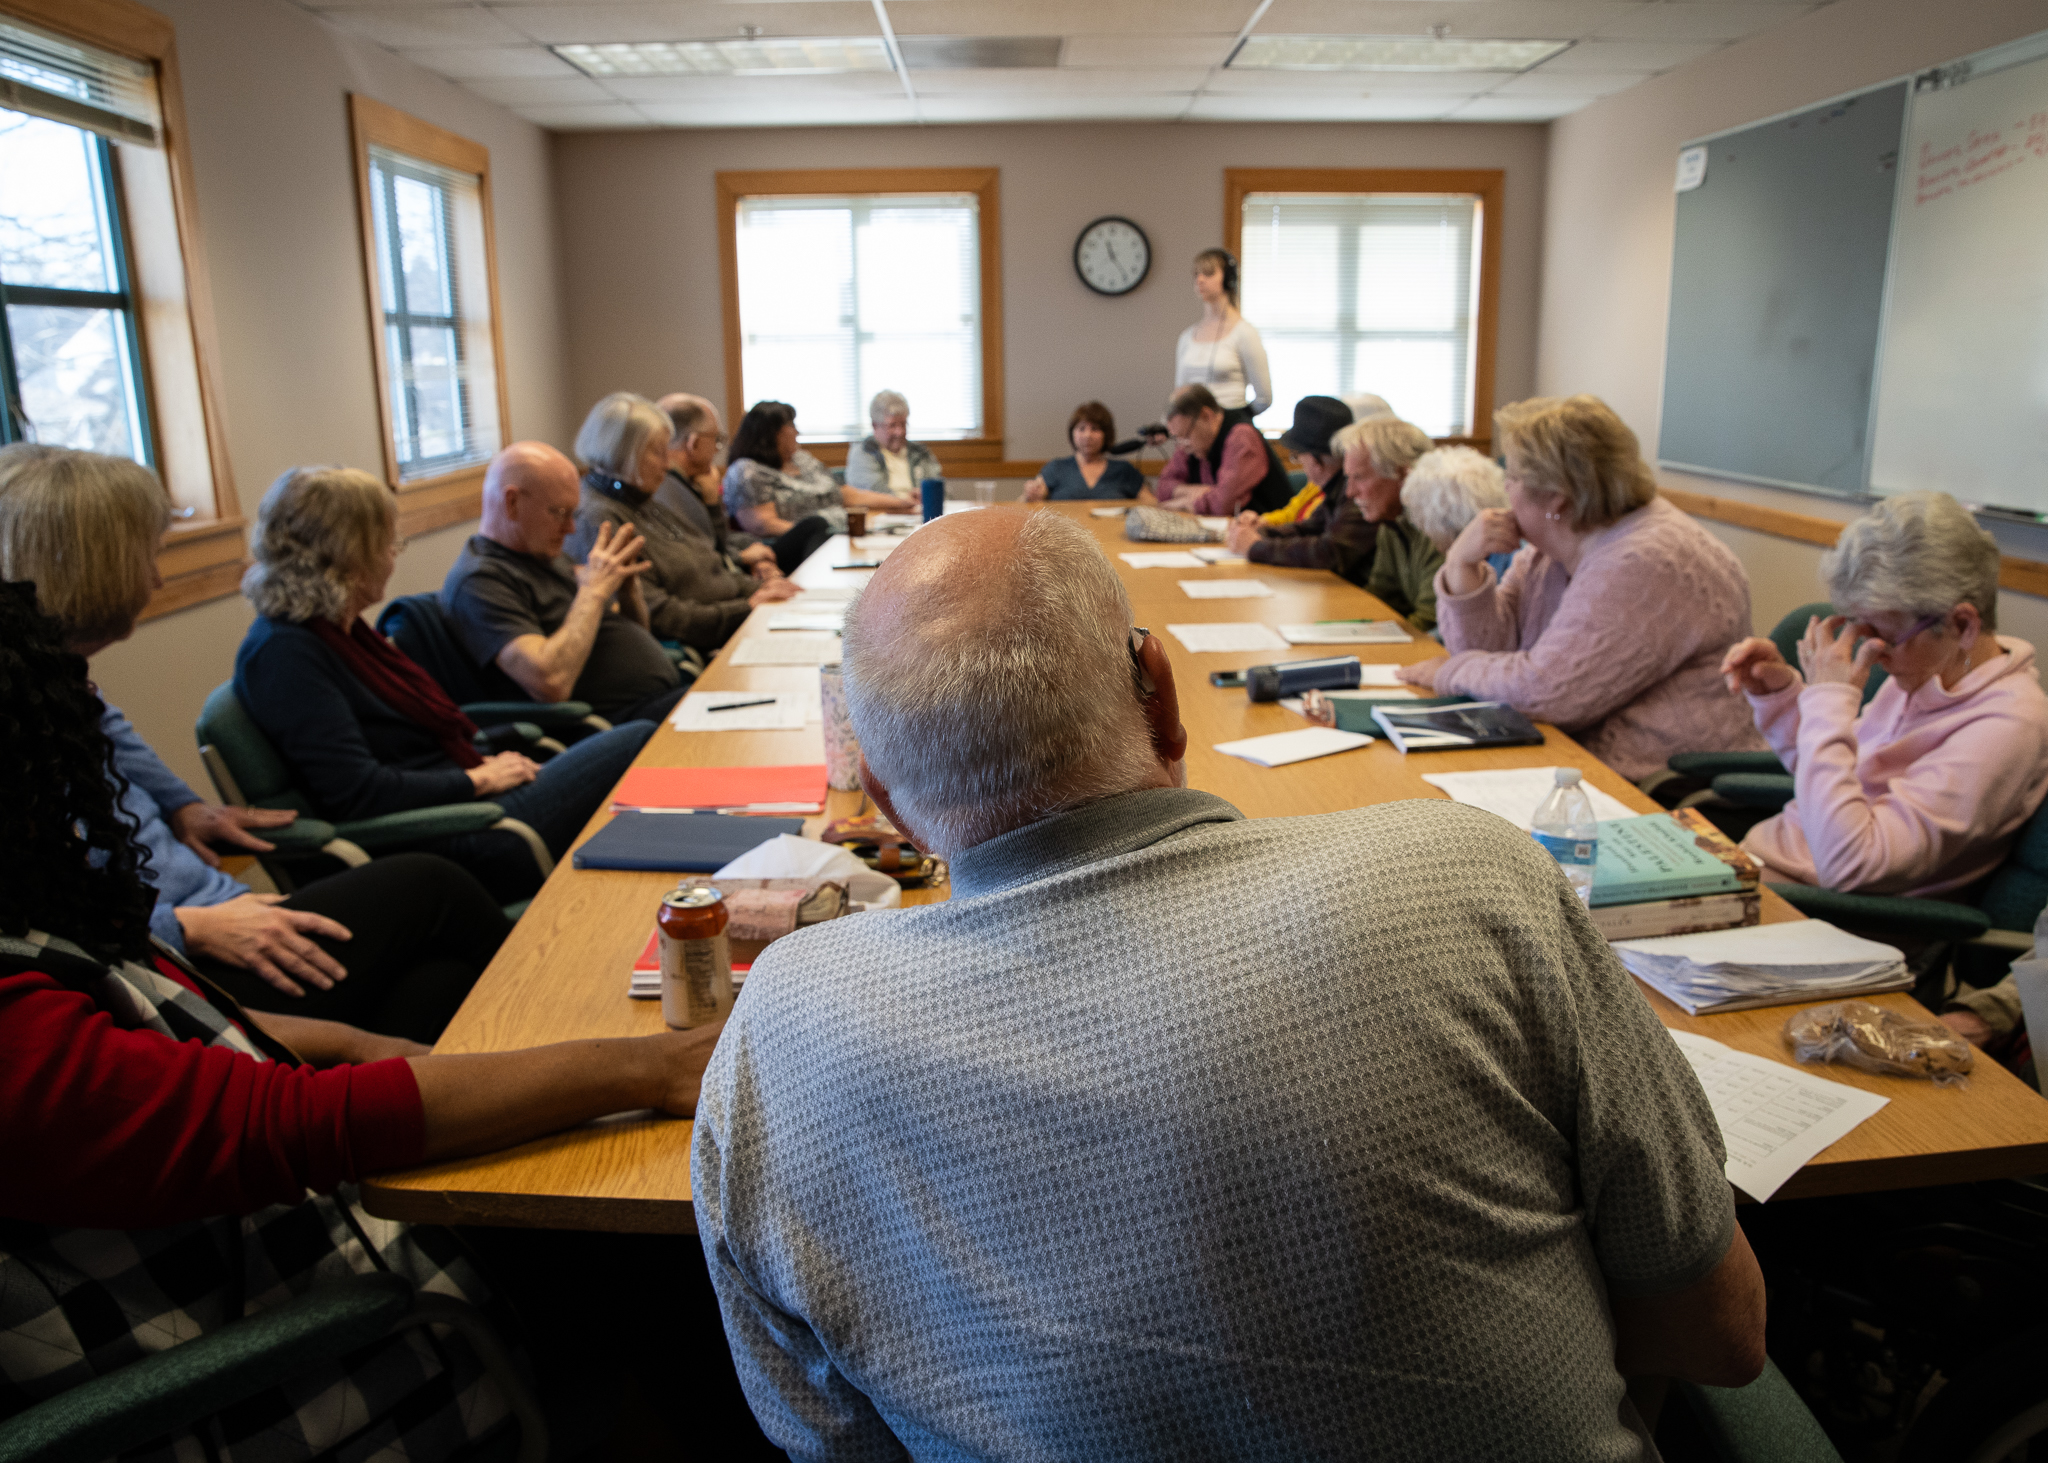 On March 14, almost two dozen participants gathered upstairs in the Port Angeles Senior and Community Center. Debate over presidential politics flourished. (Credit: Tela Moss / NWPB)